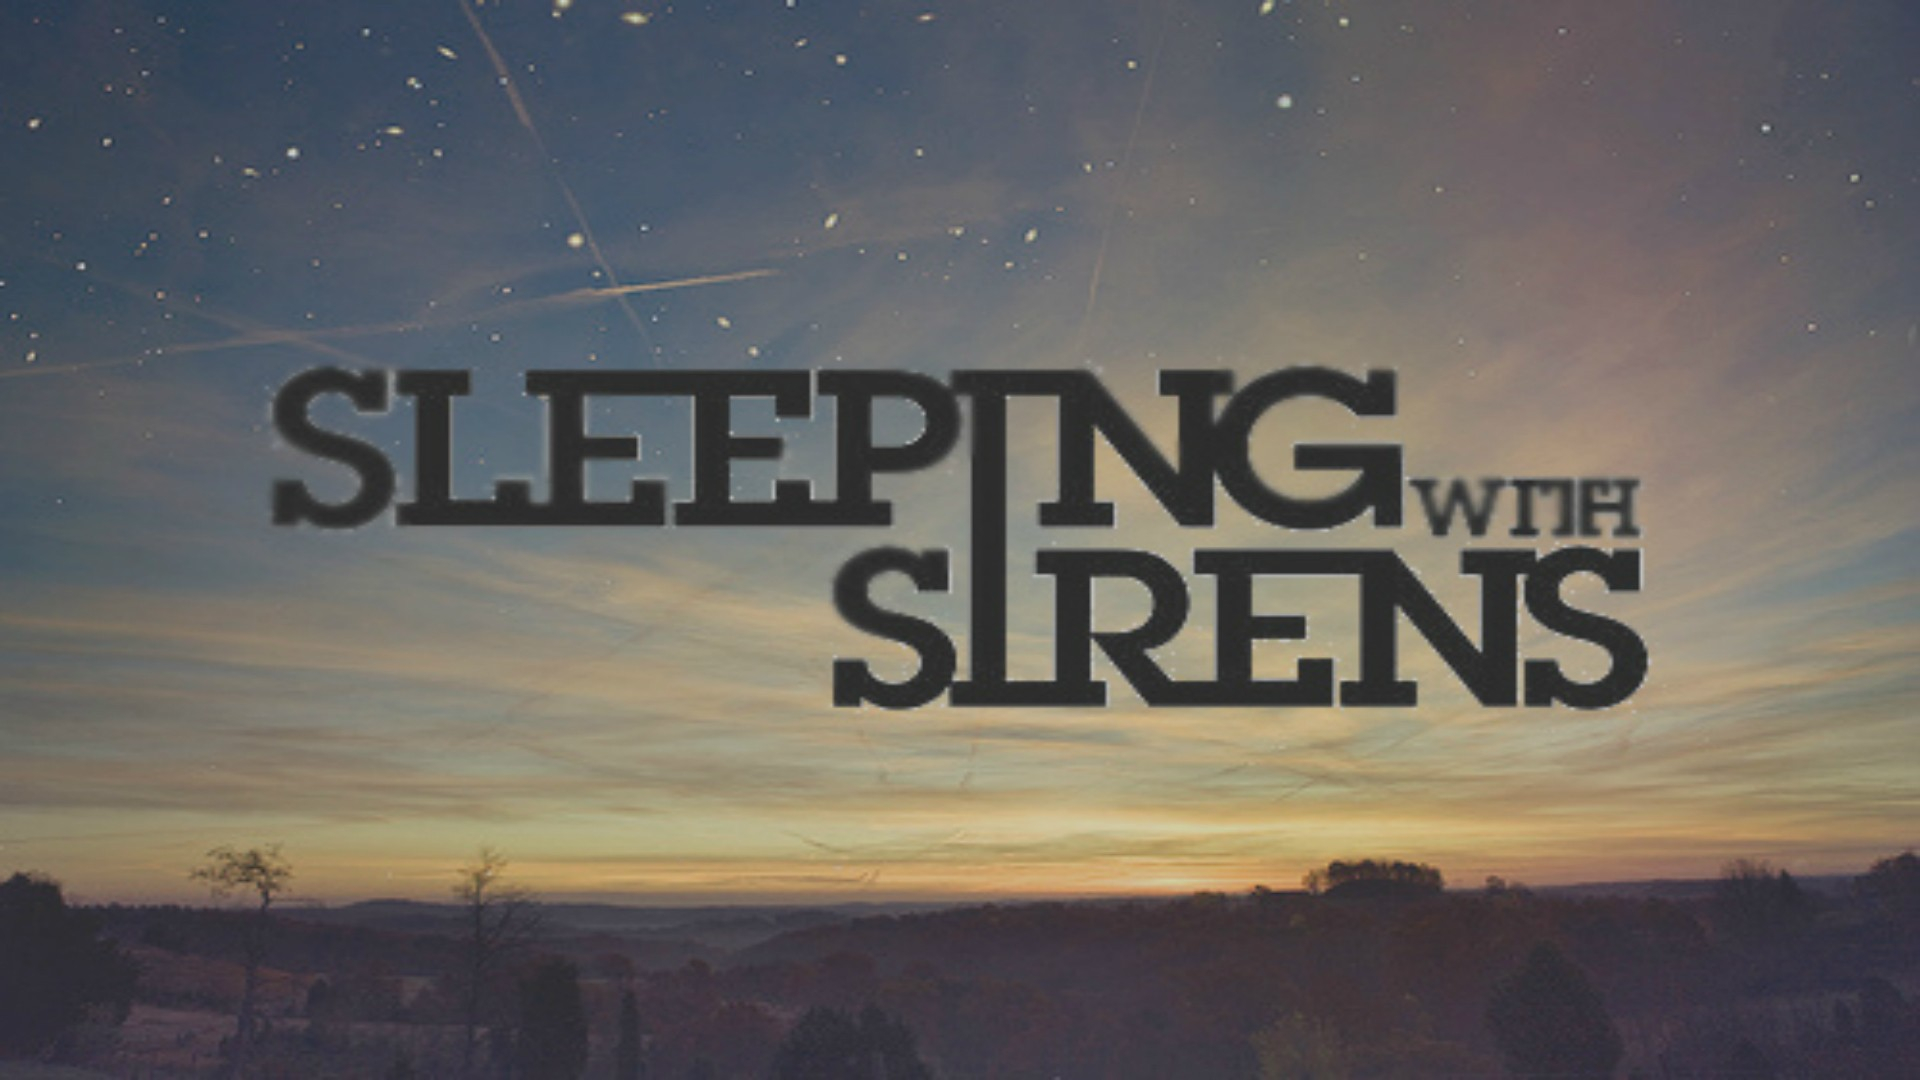 1920x1080 sleeping, With, Sirens, Bands Wallpapers HD / Desktop and Mobile Backgrounds